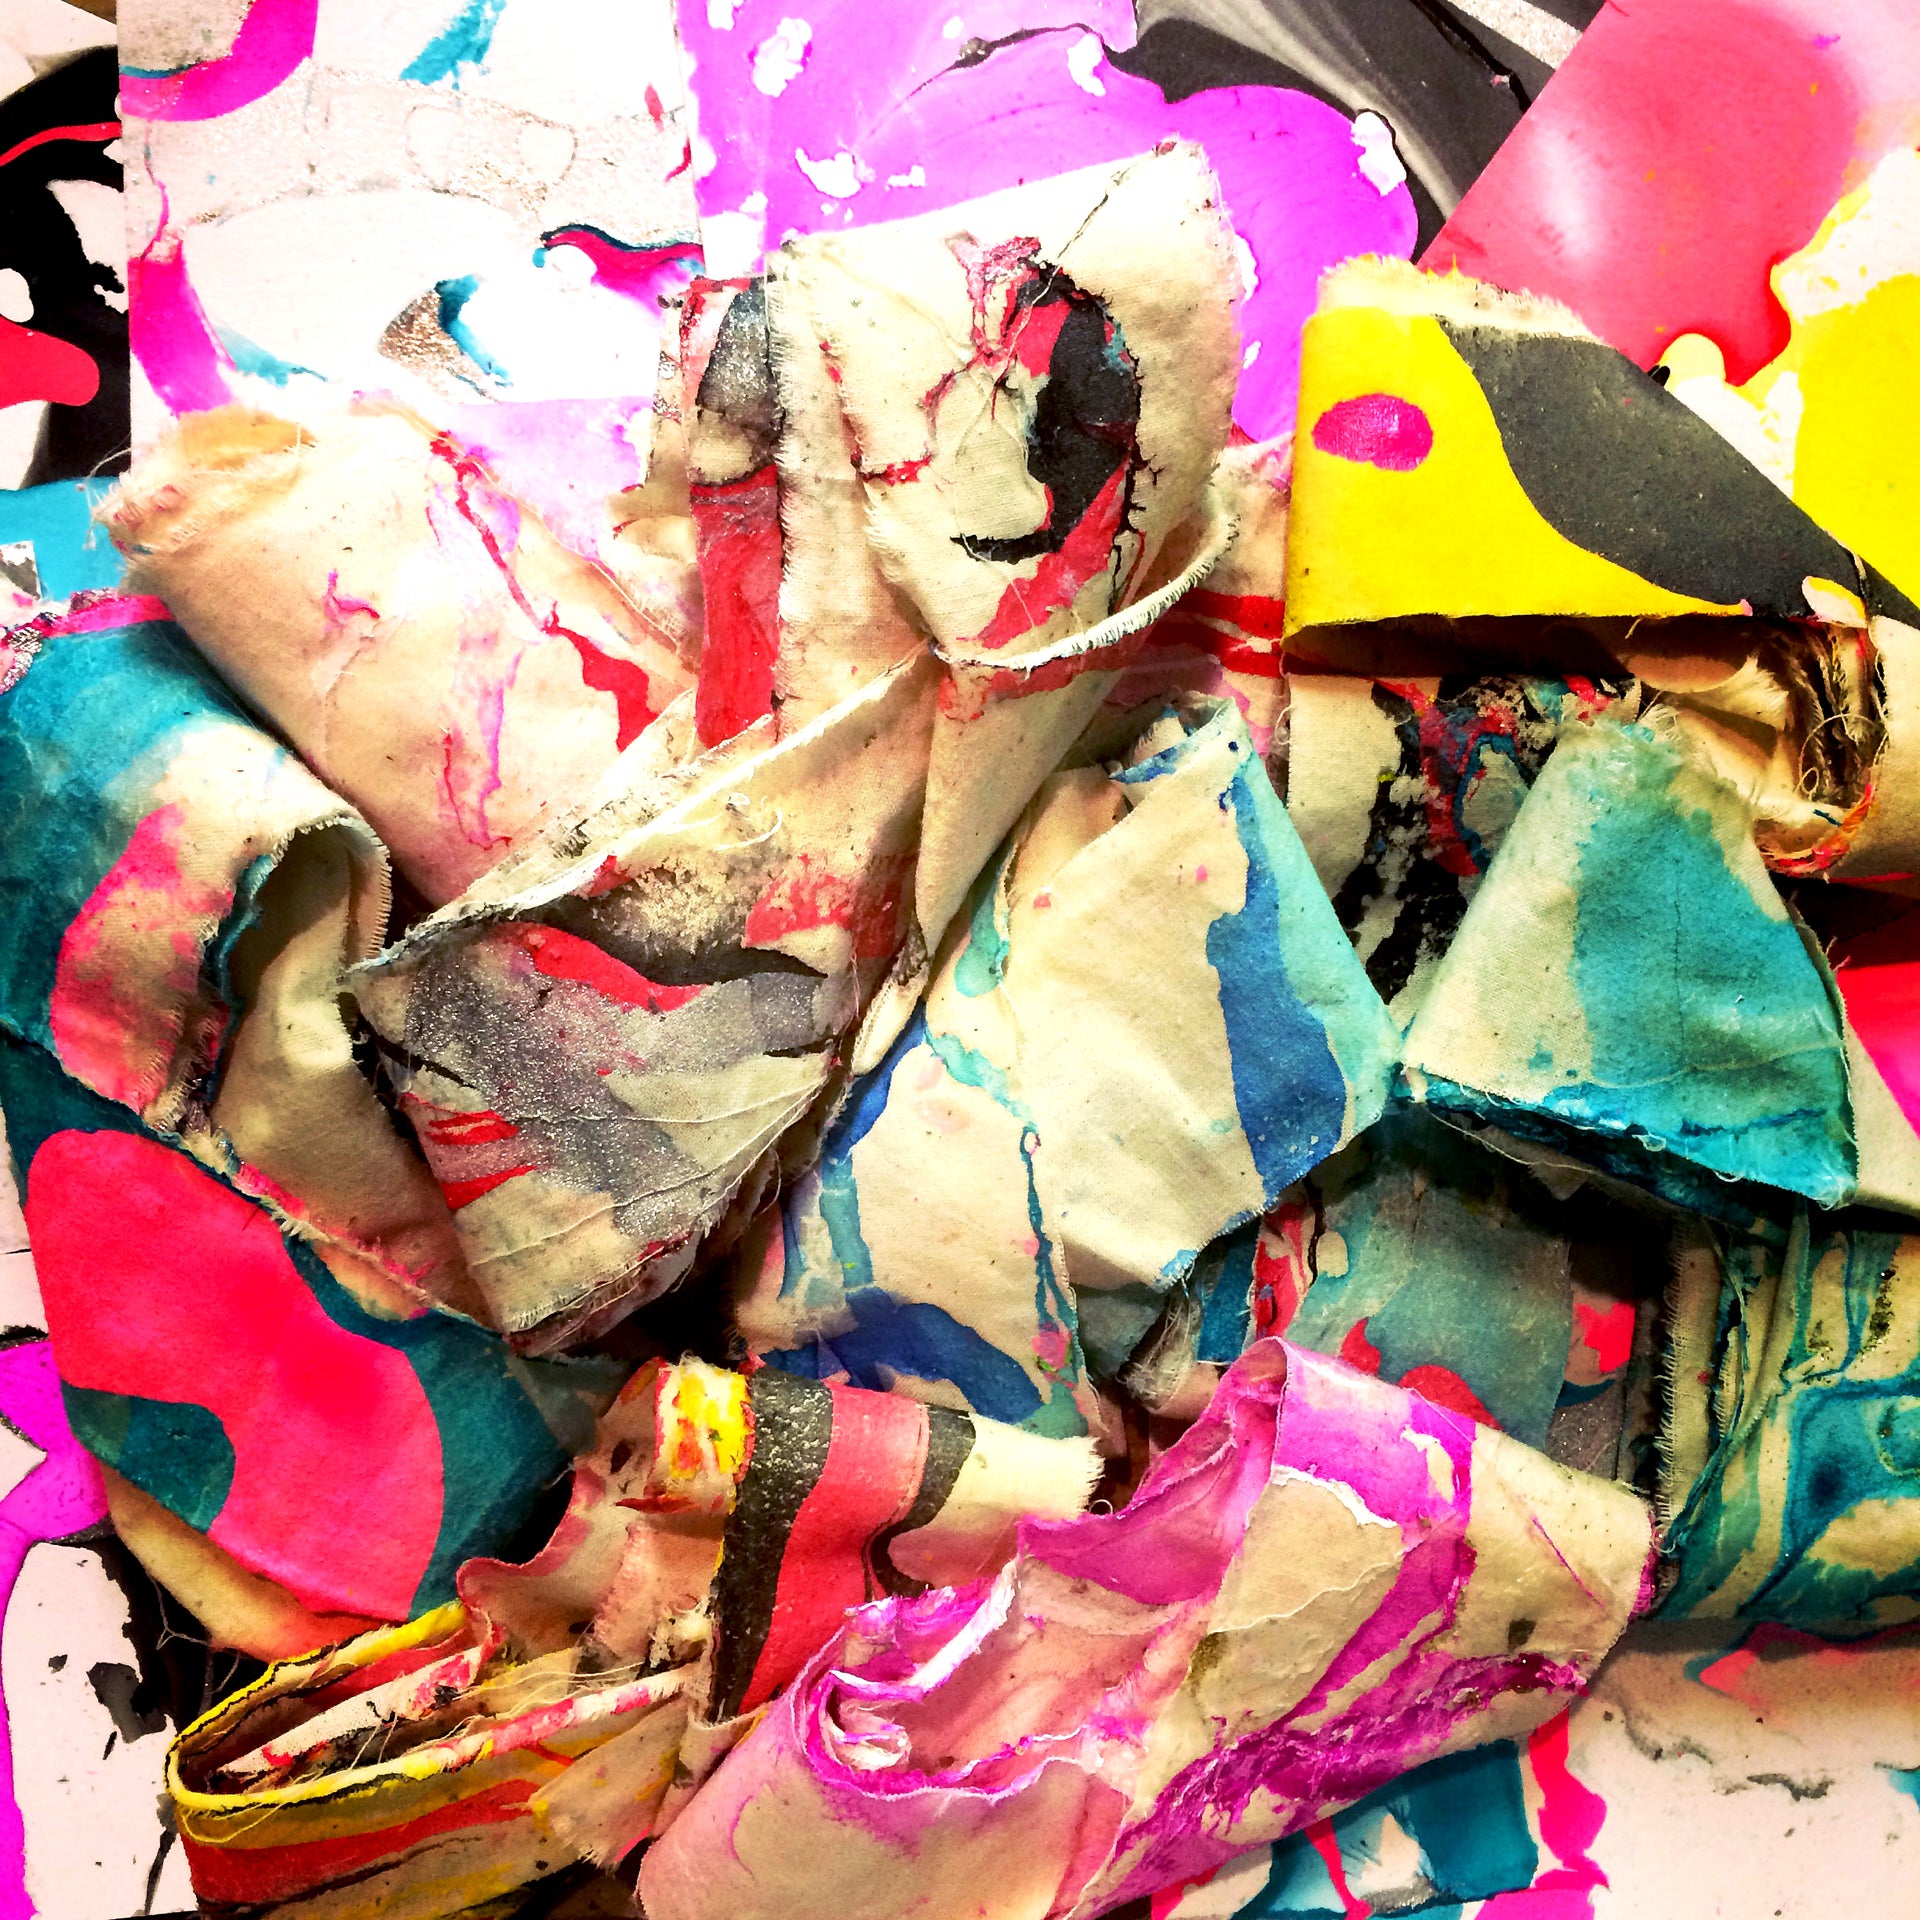 Load video: hello babies! this is a lil video with some samples of my mixed media artwork. xo